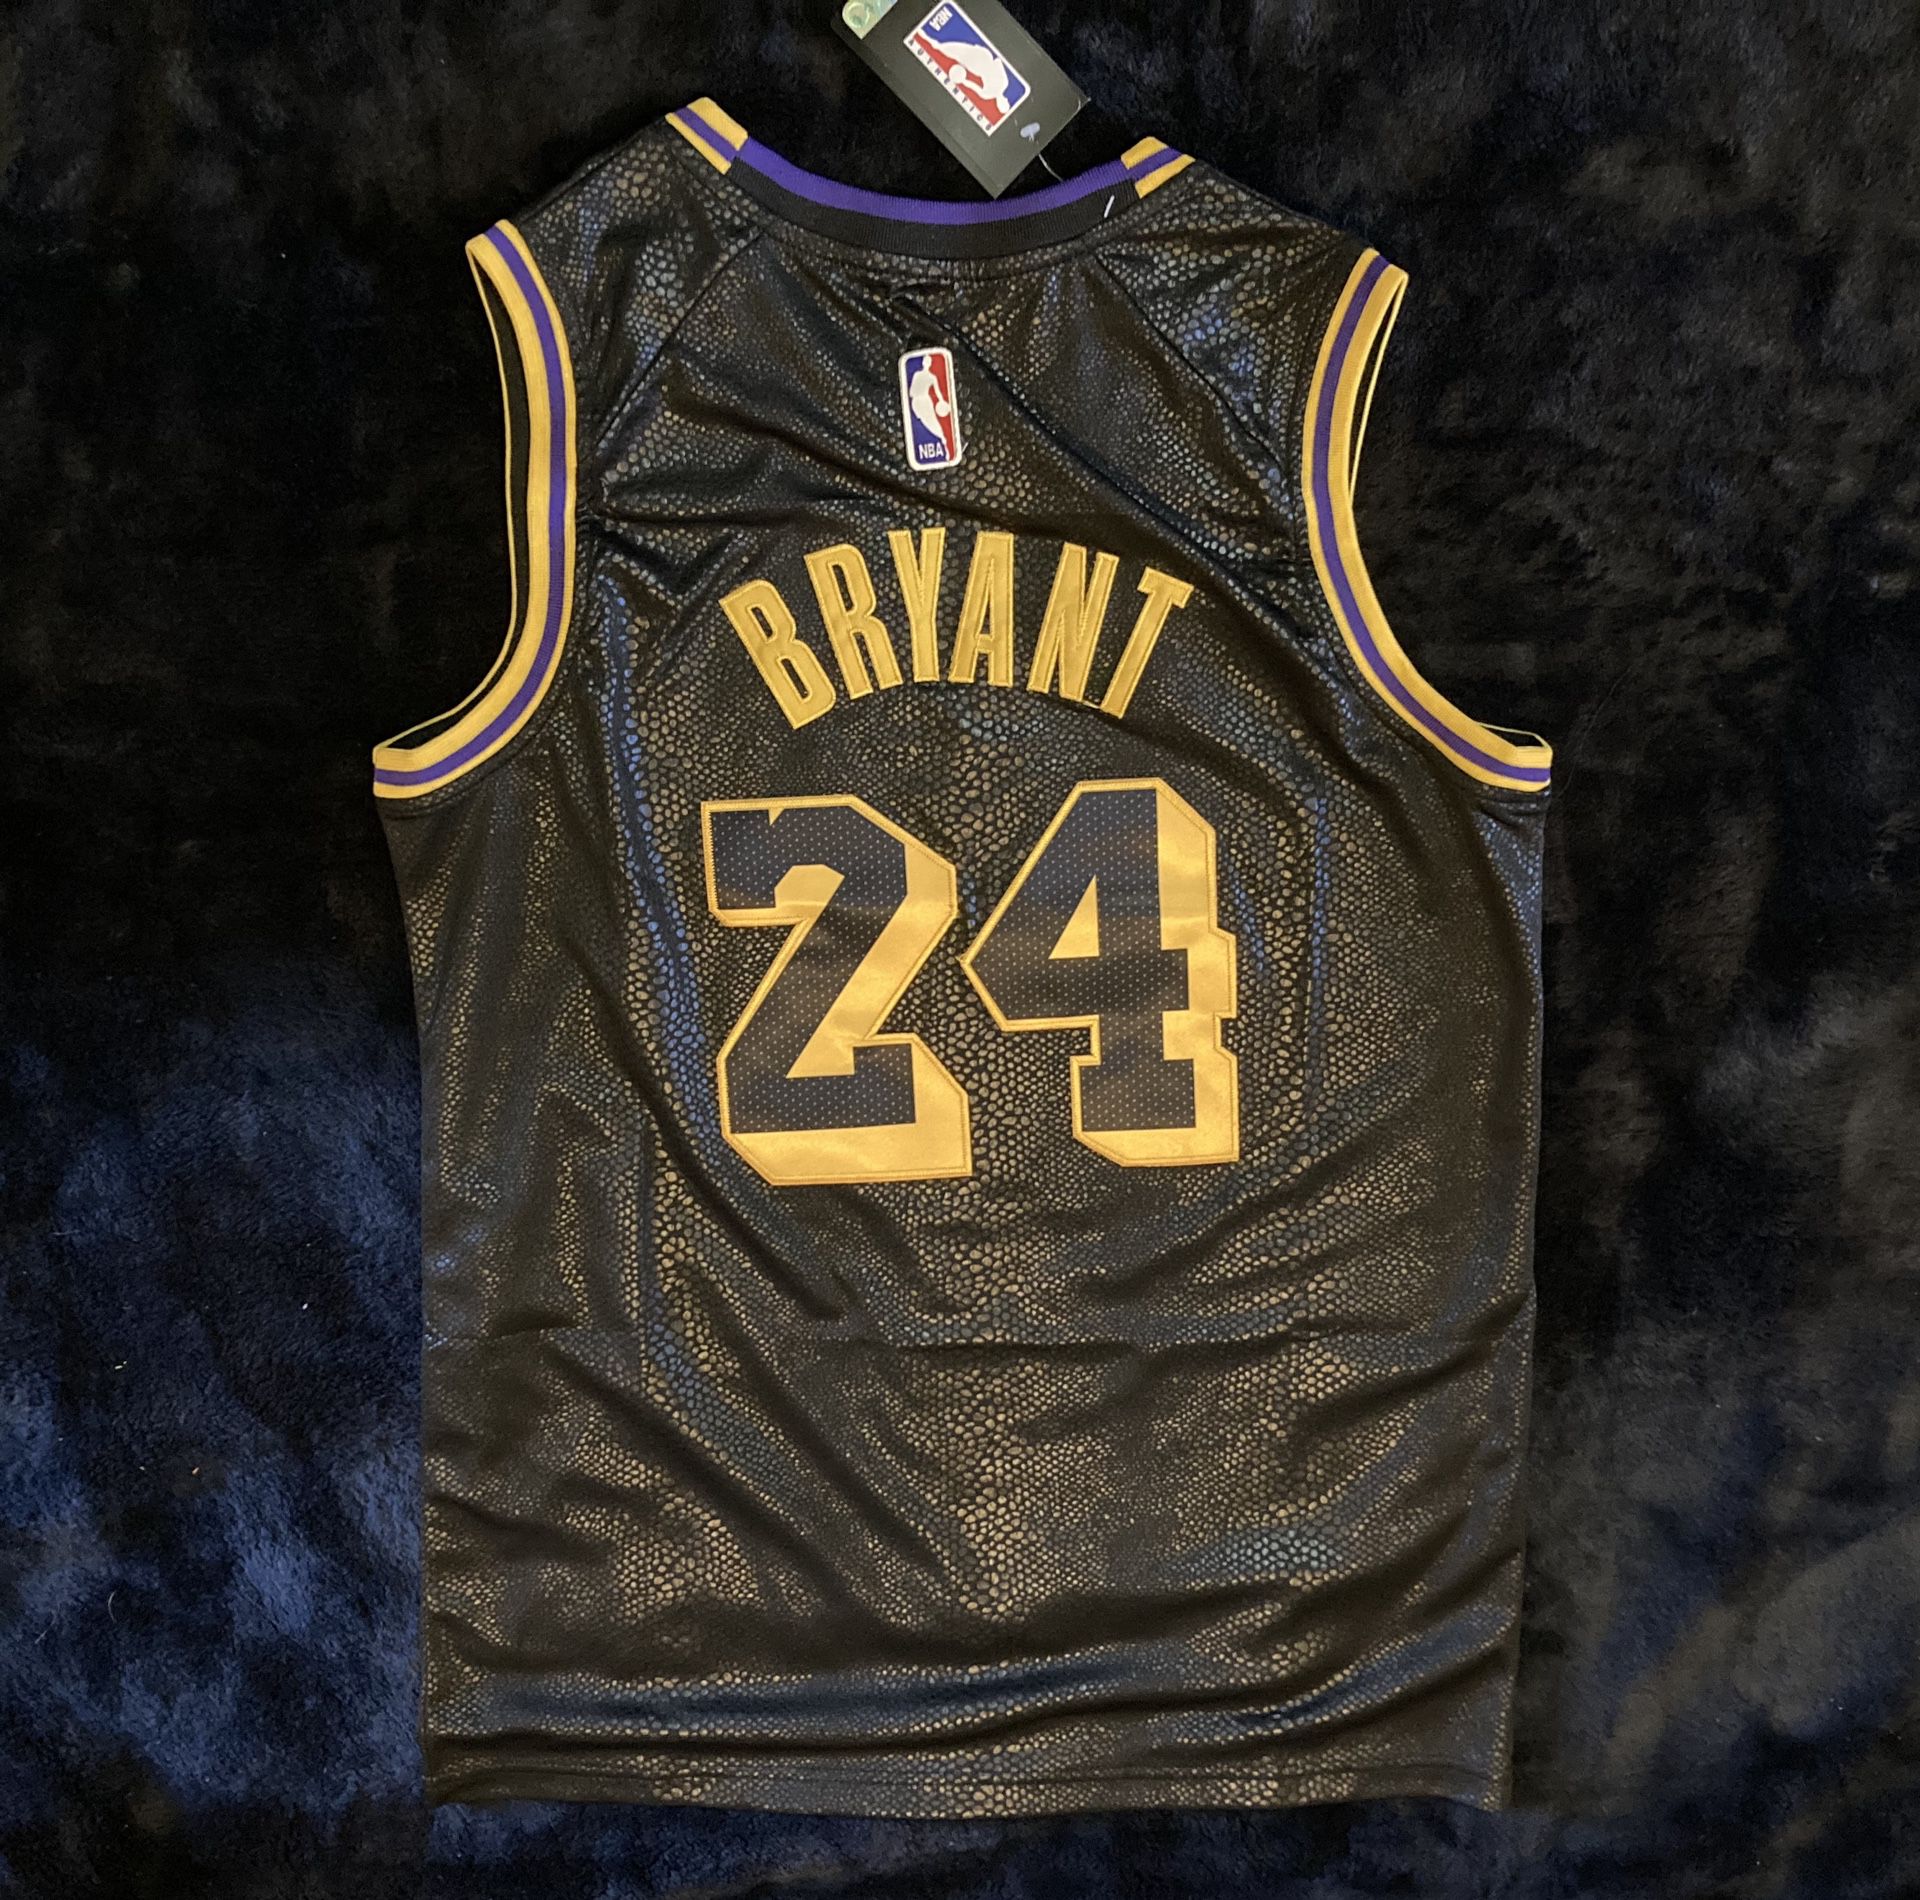 Los Angeles Lakers #24 Black Mamba Black With Purple Swingman Jersey on  sale,for Cheap,wholesale from China